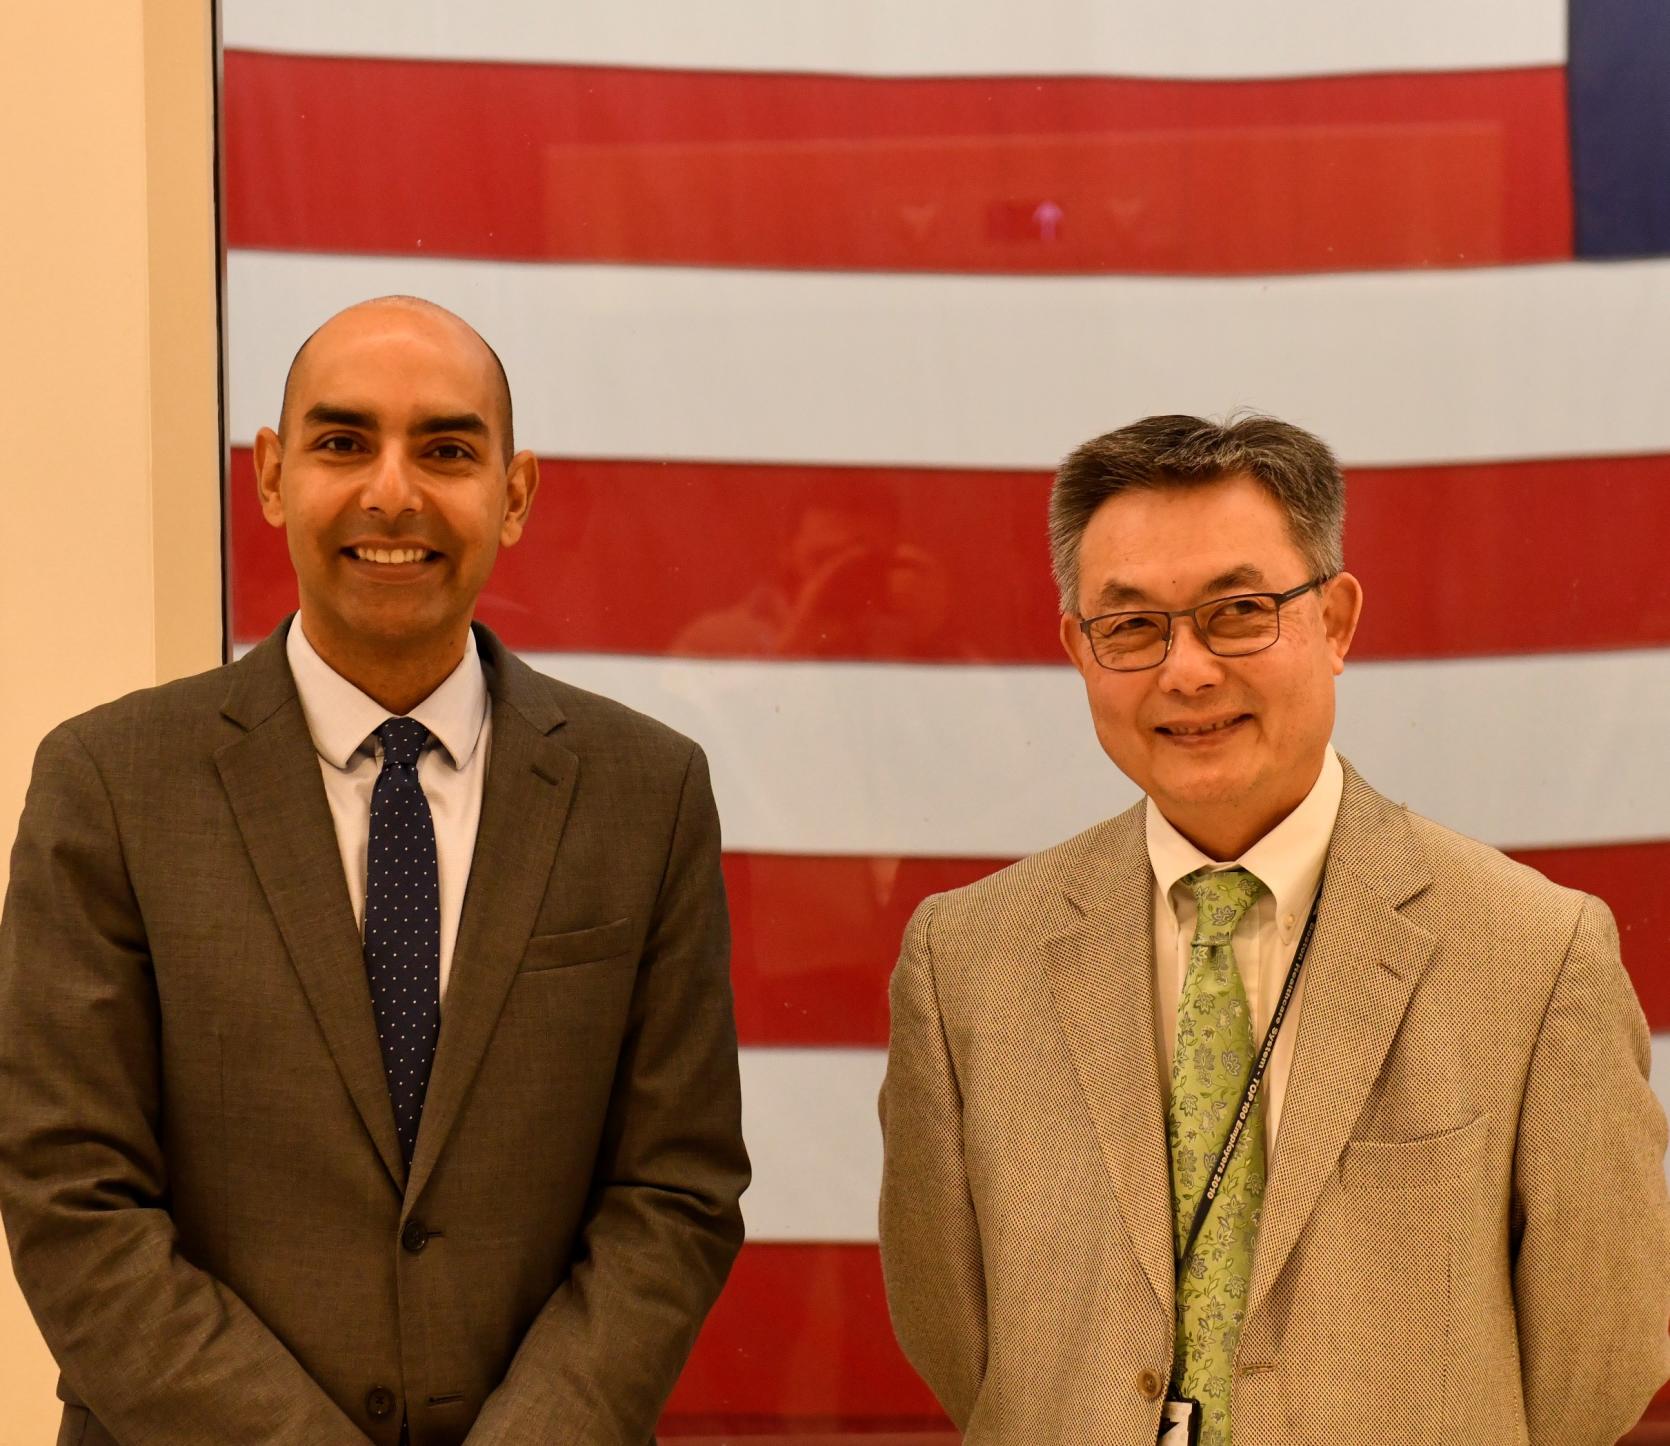 Executive Office of Veterans’ Services Secretary Jon Santiago with Vincent Ng, Director of the VA Boston Healthcare system